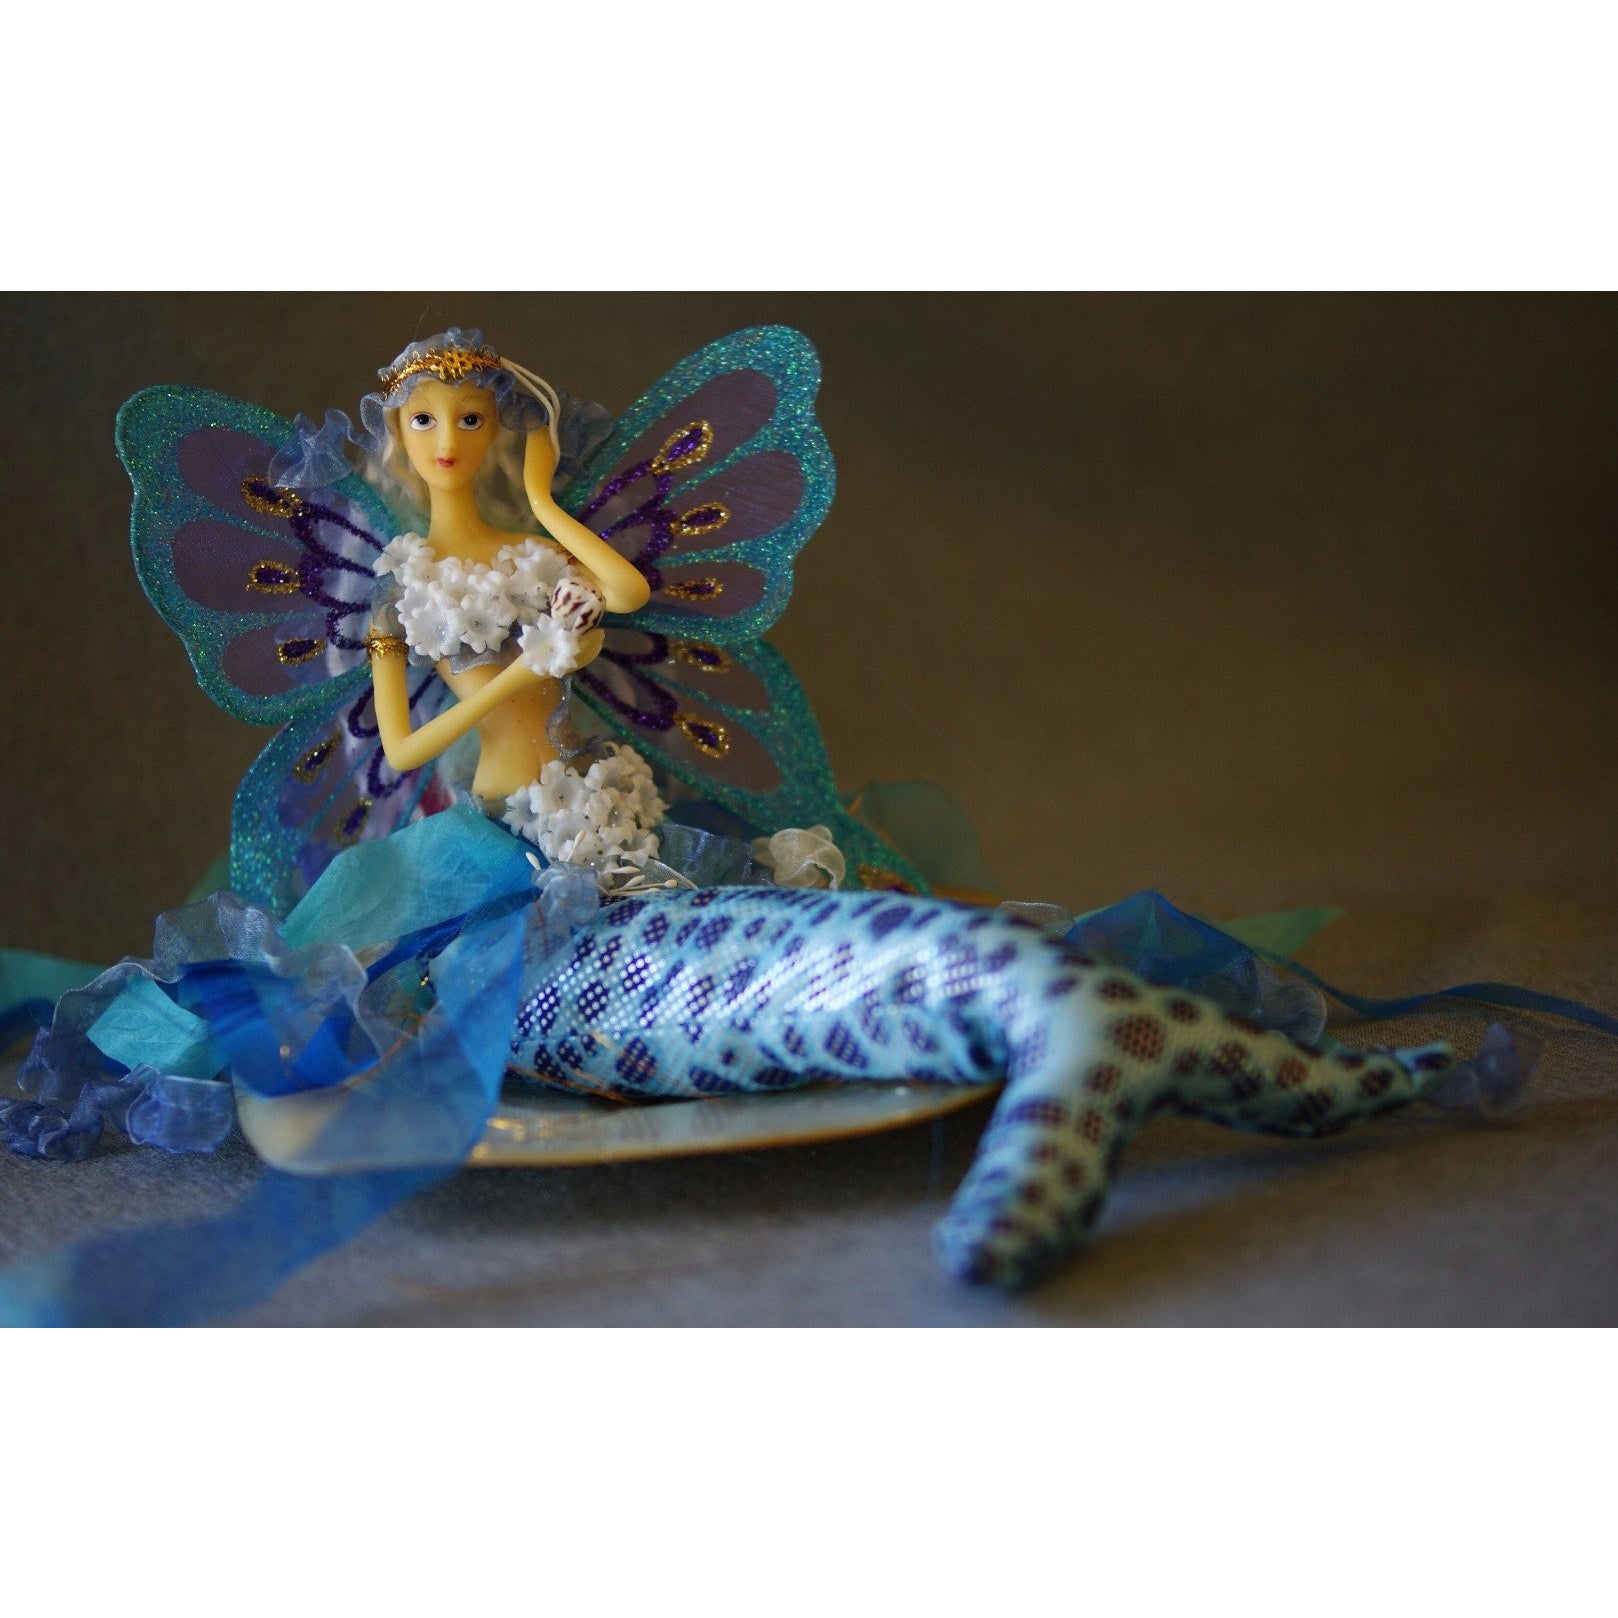 mermaid crown doll flexible tail holding shell butterfly wings royal blue turquiose tail